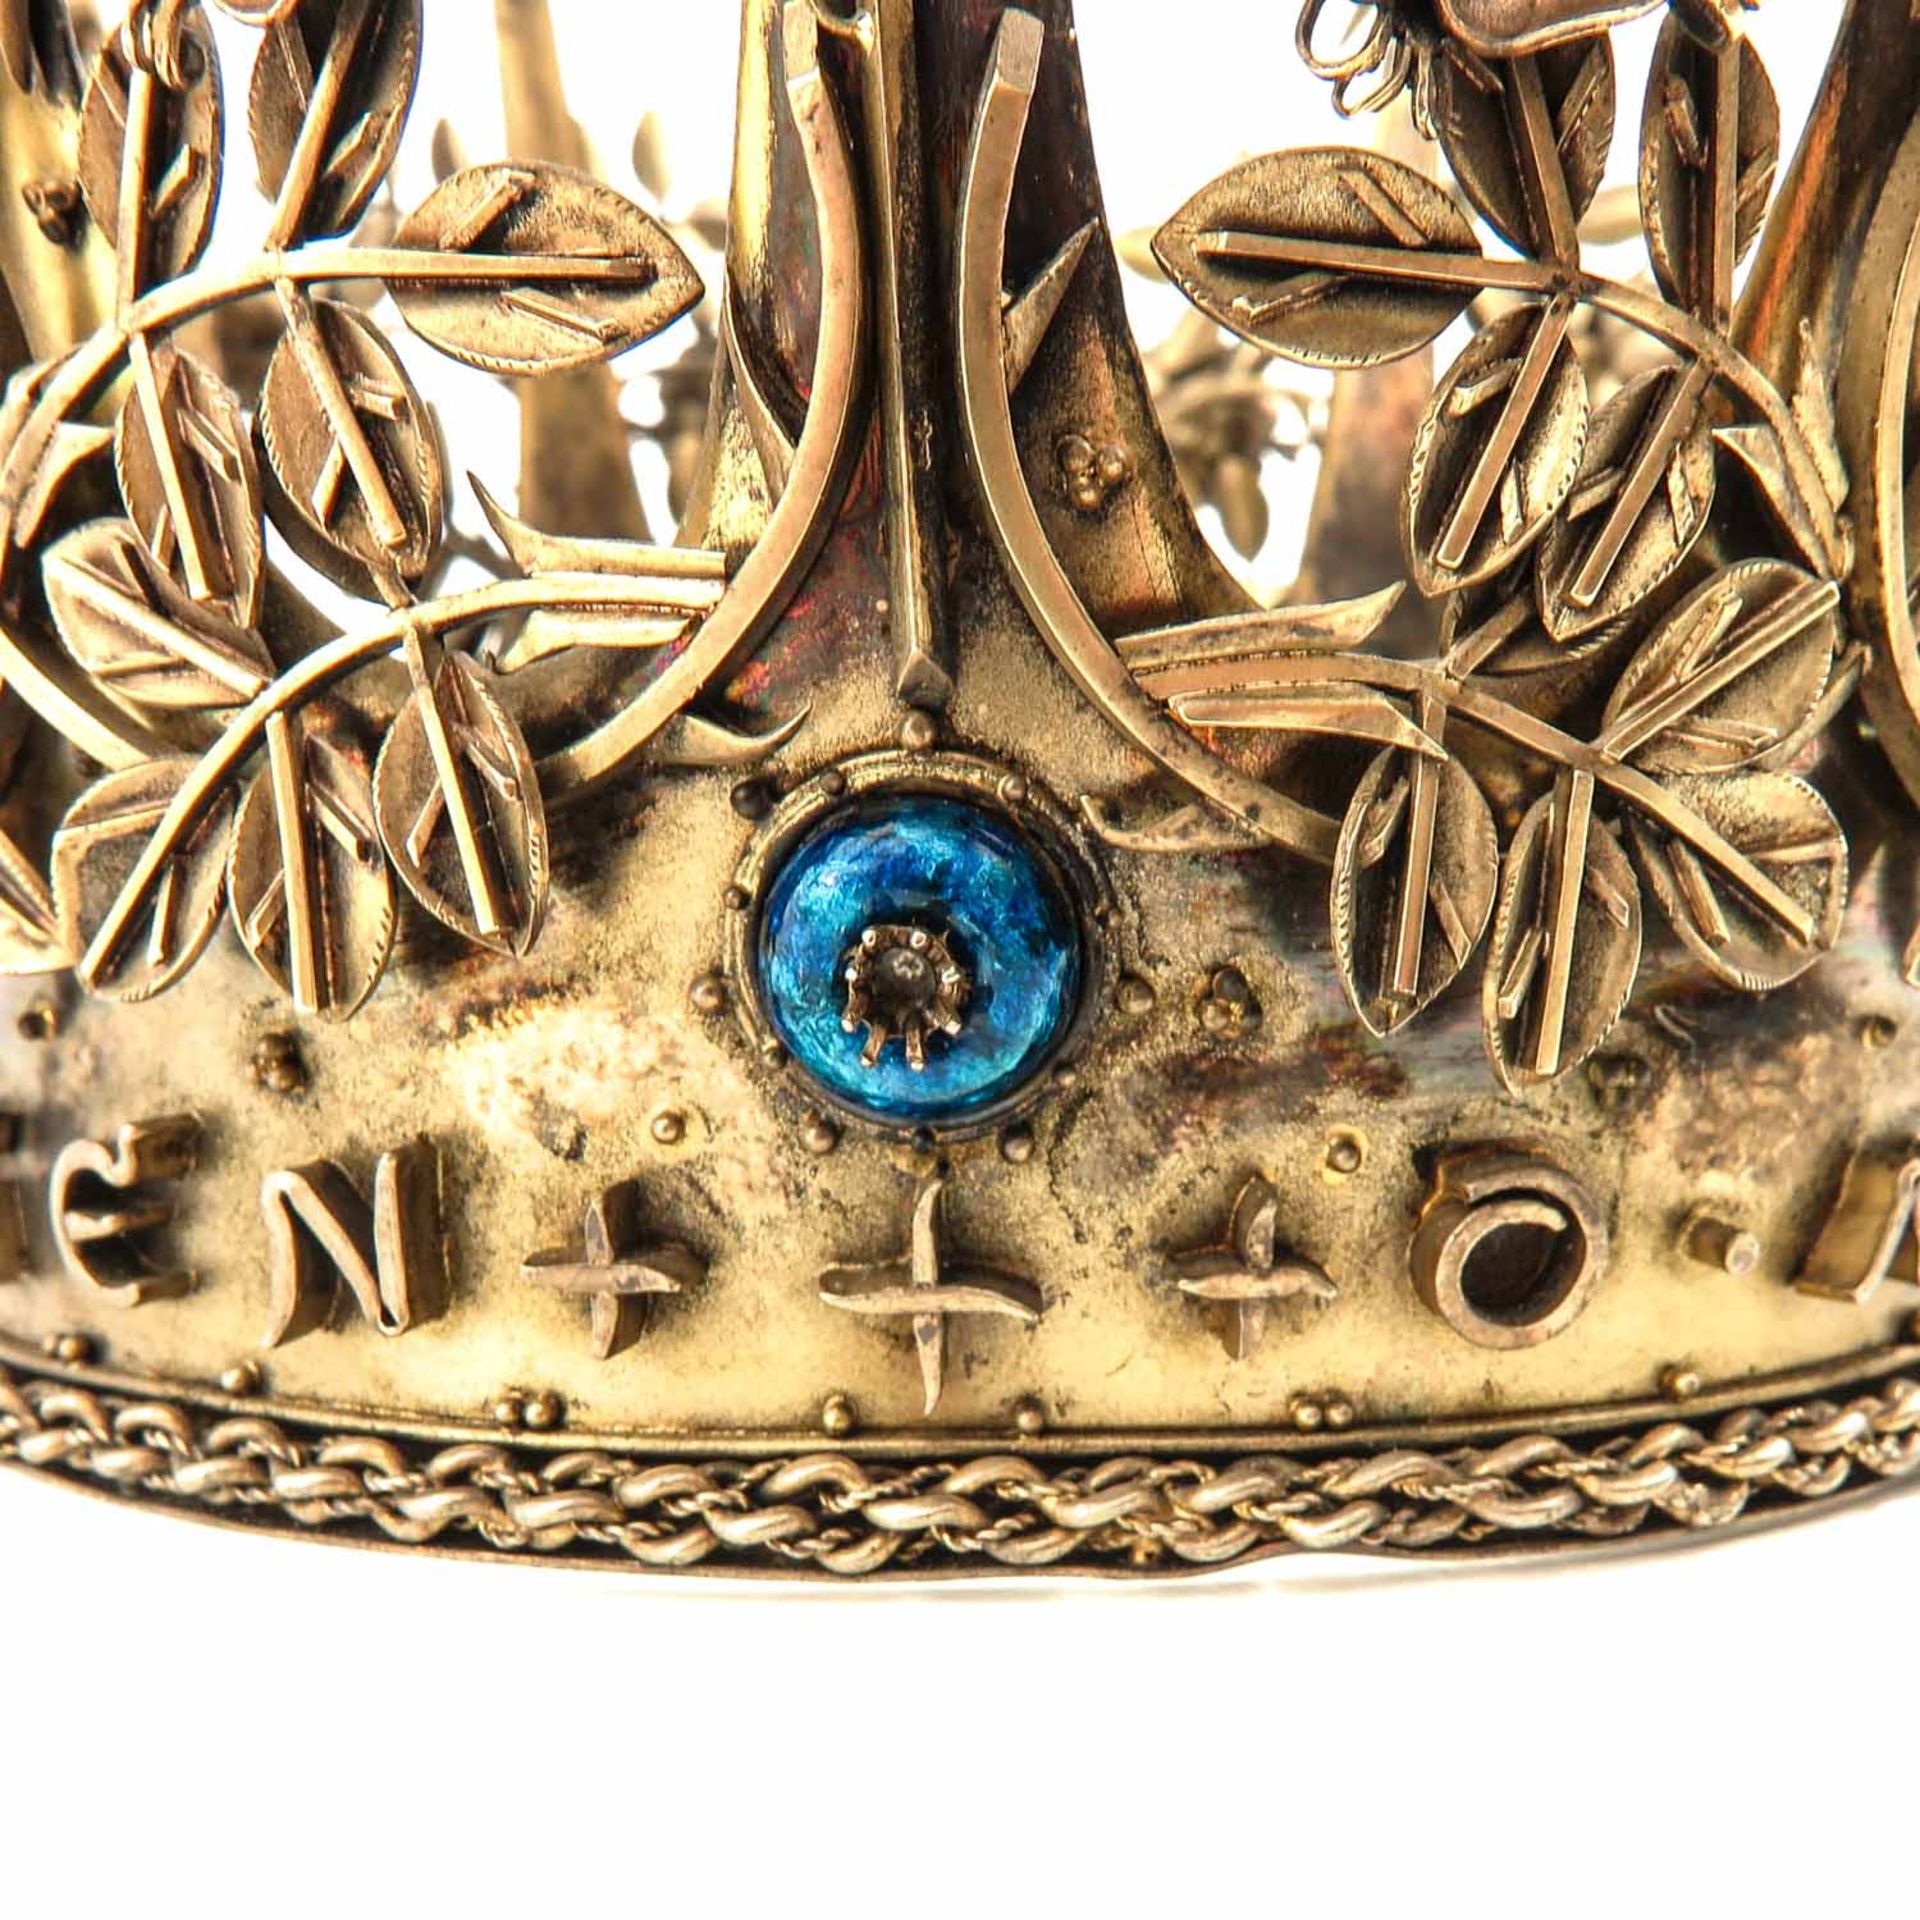 A Beautiful Crown for a Saint Sculpture - Image 9 of 9